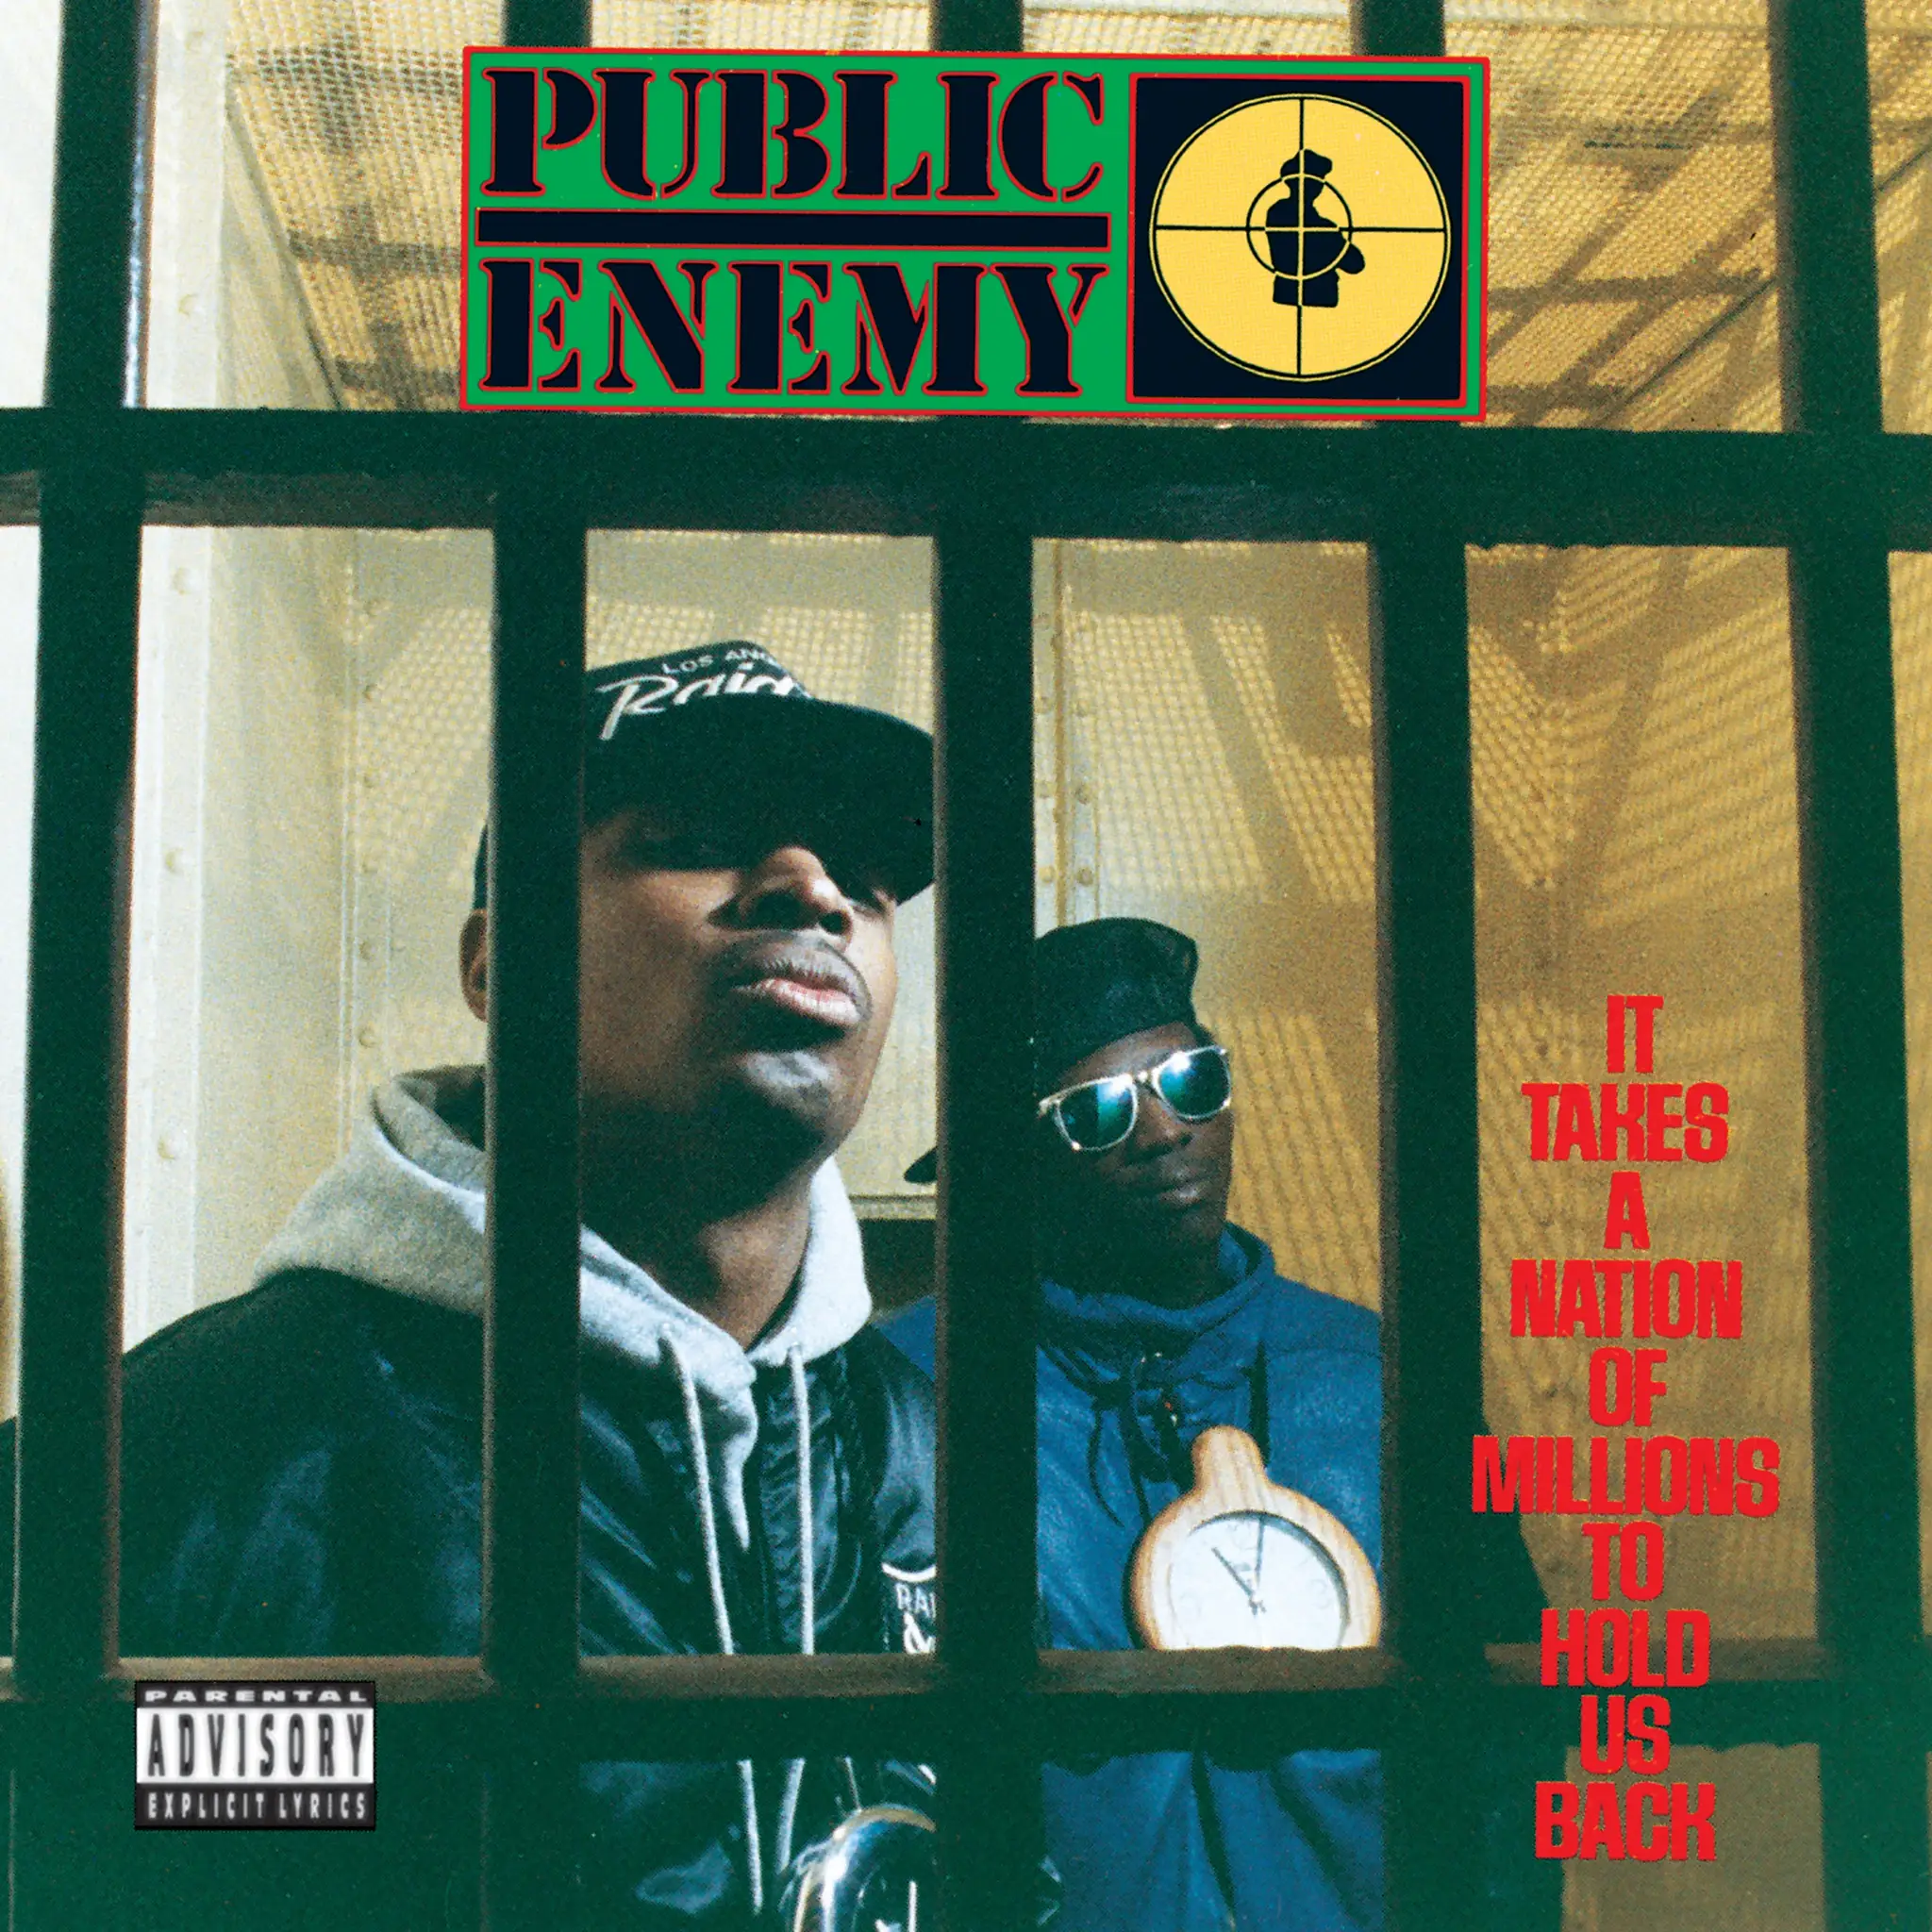 <strong>Public Enemy - It Takes A Nation of Millions To Hold Us Back (35th Anniversary Edition)</strong> (Vinyl LP - black)